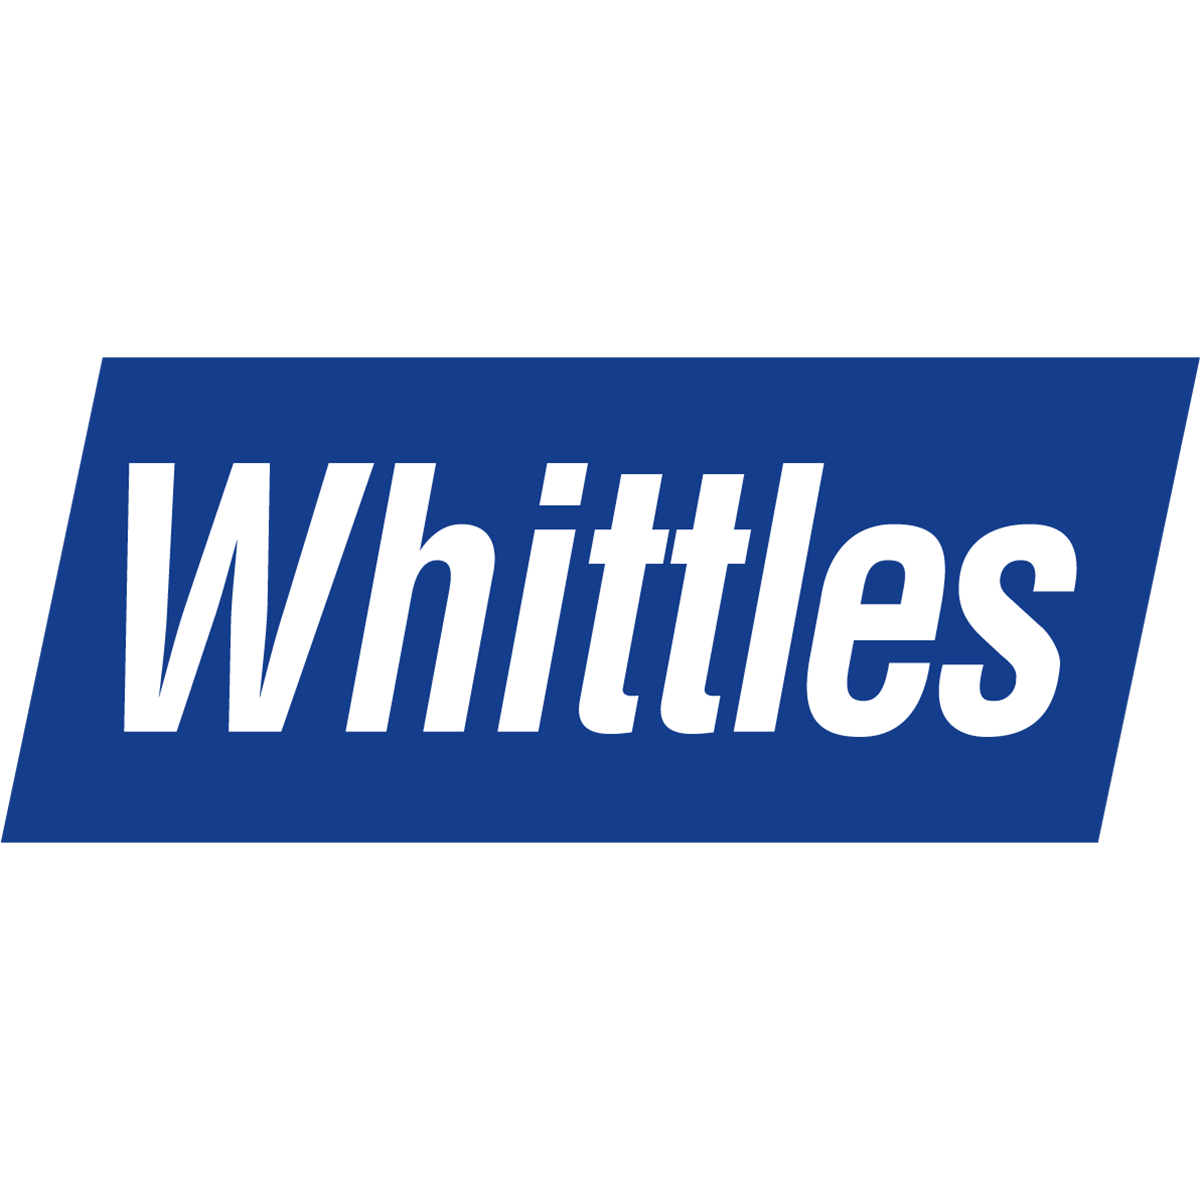 Whittles in white writing on a blue rectangle.